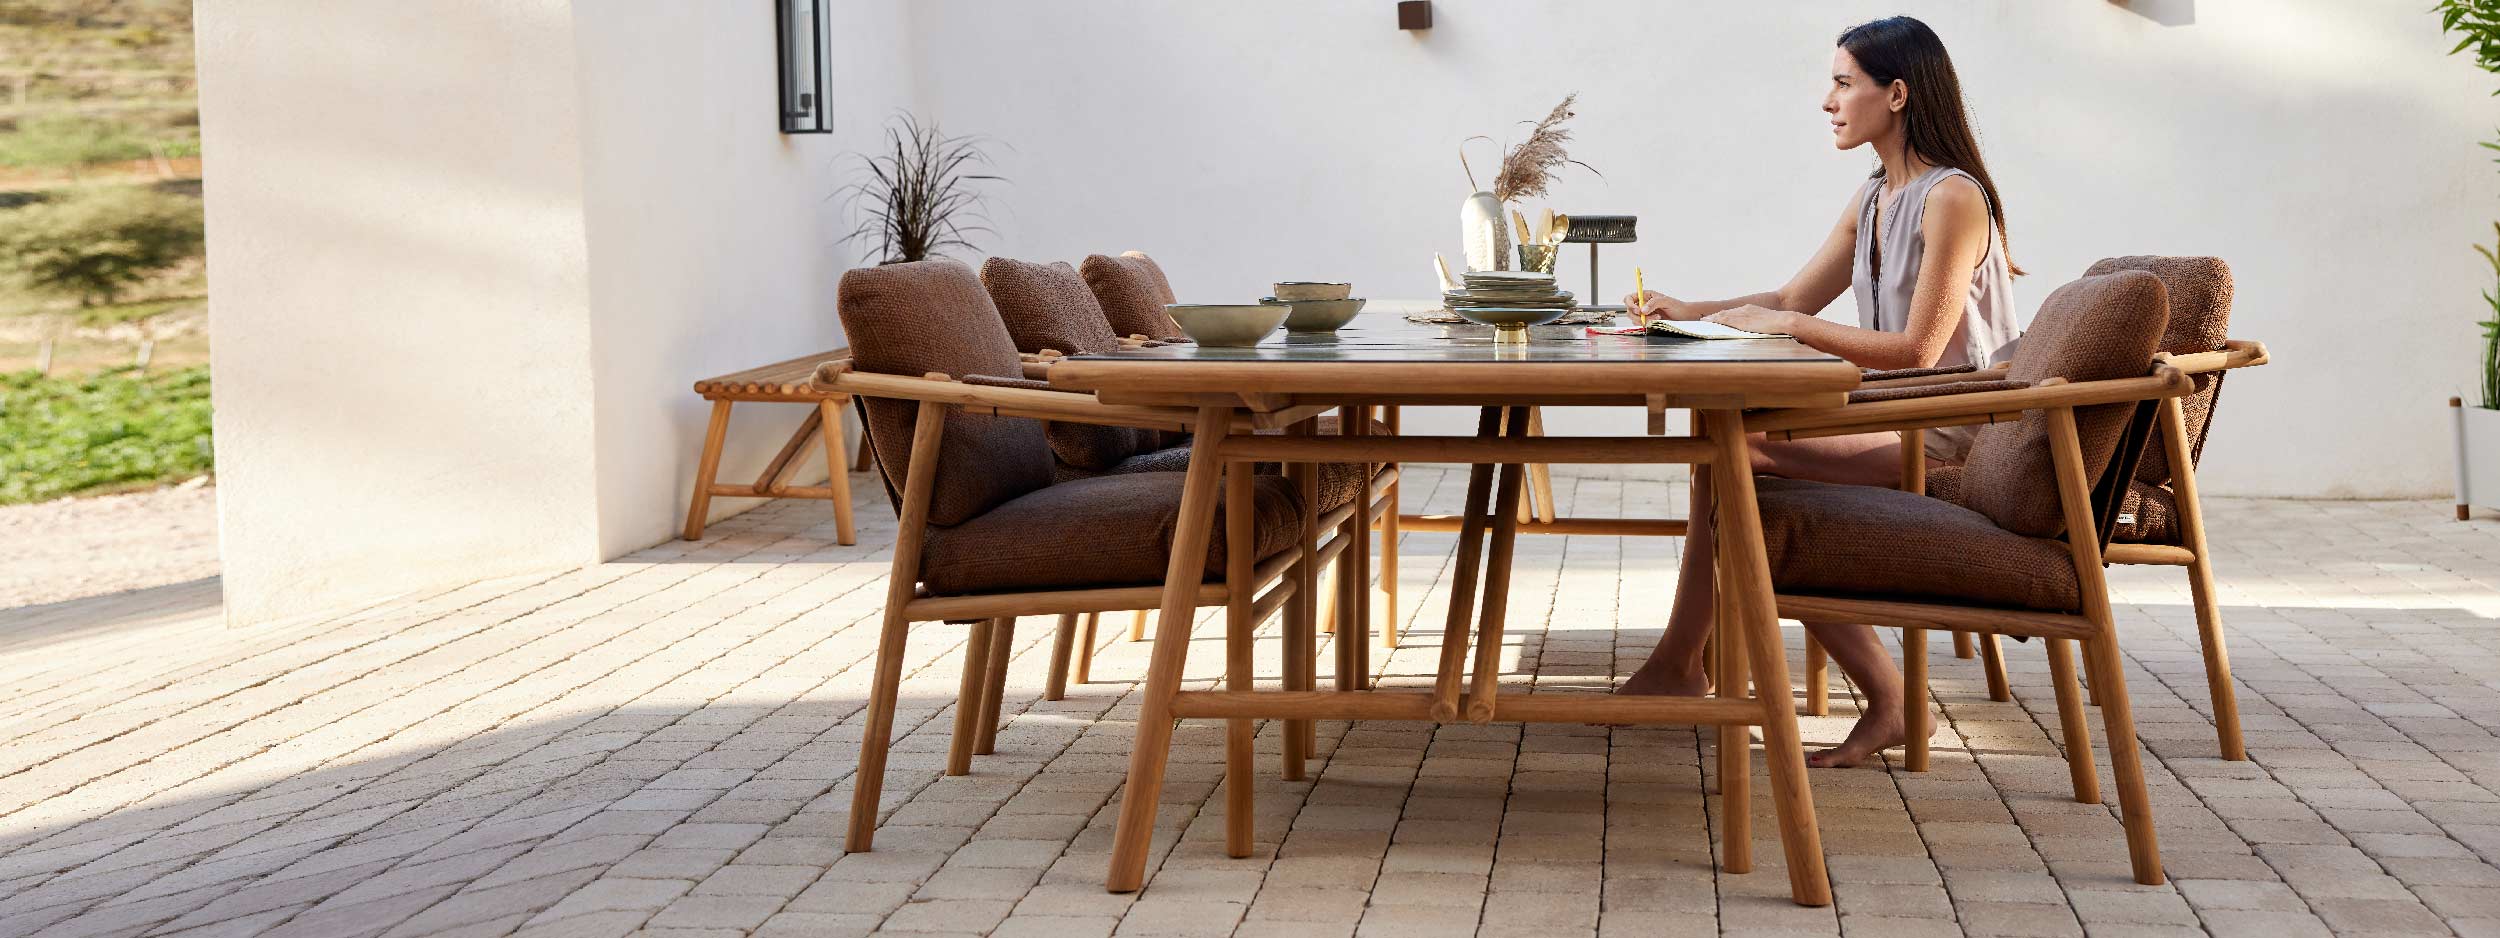 Image of Sticks FSC teak garden dining set with Umber Brown cushions by Cane-line